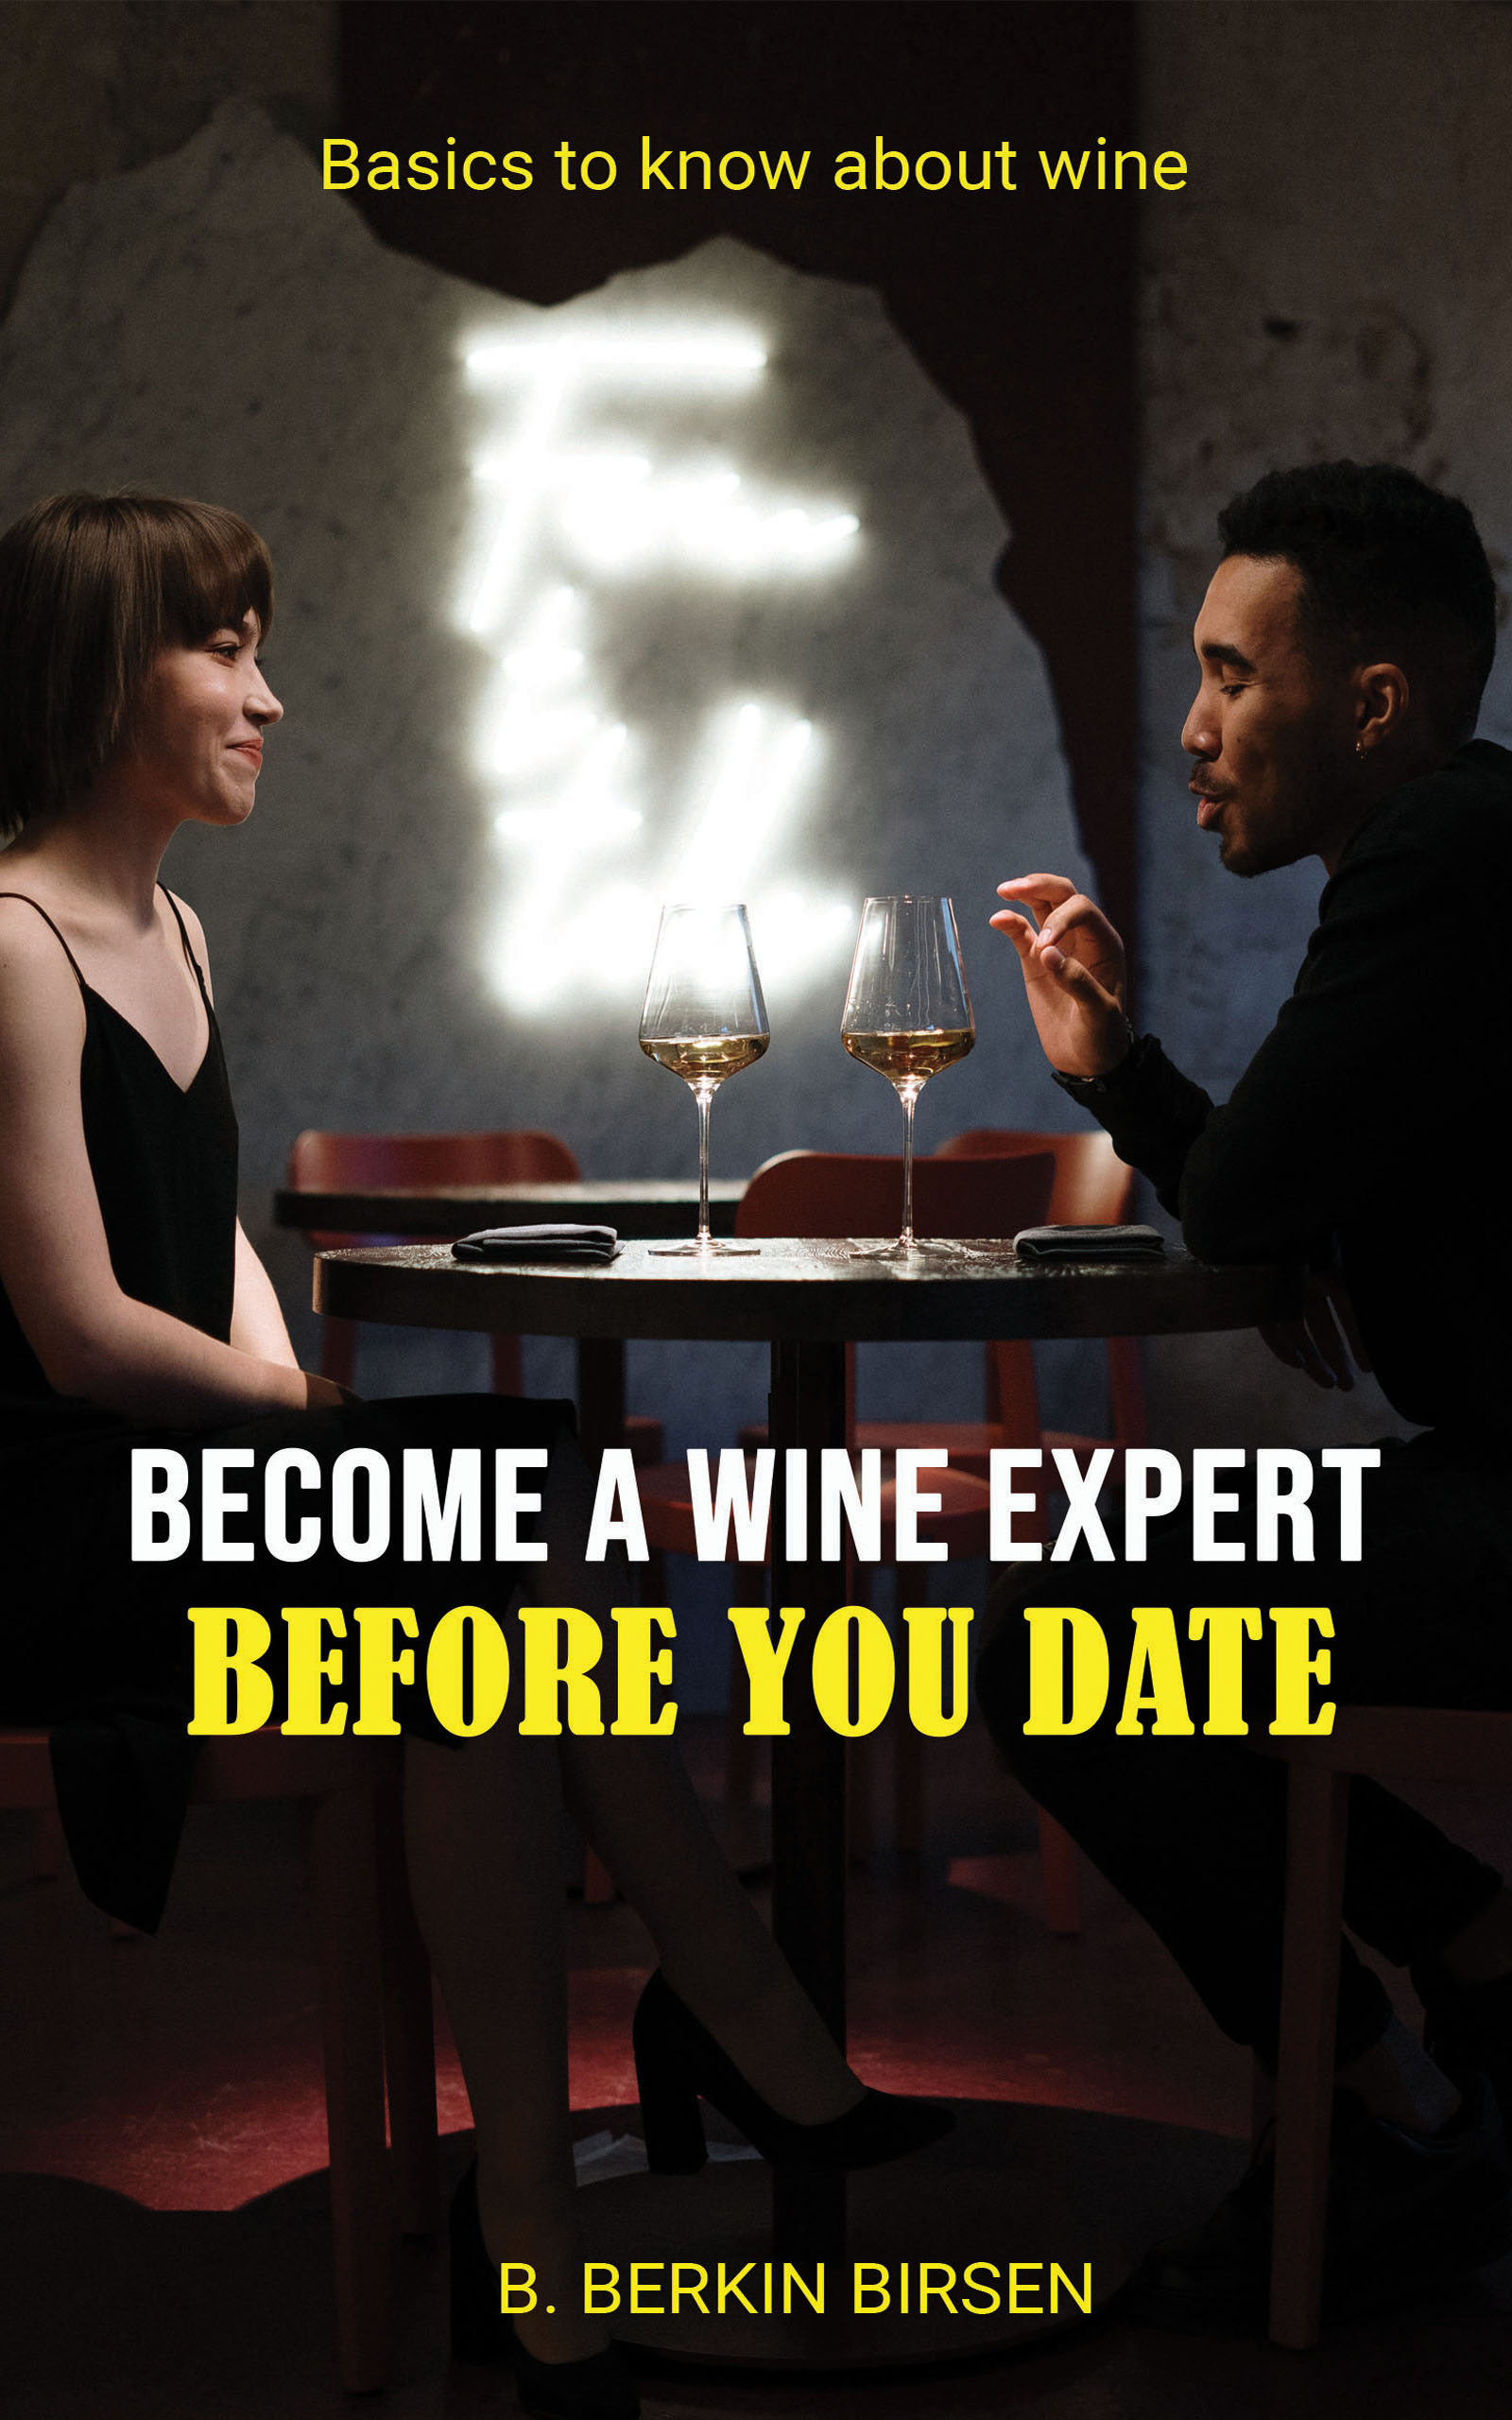 FREE: BECOME A WINE EXPERT BEFORE YOU DATE: BASICS TO KNOW ABOUT WINE by B.BERKIN BIRSEN